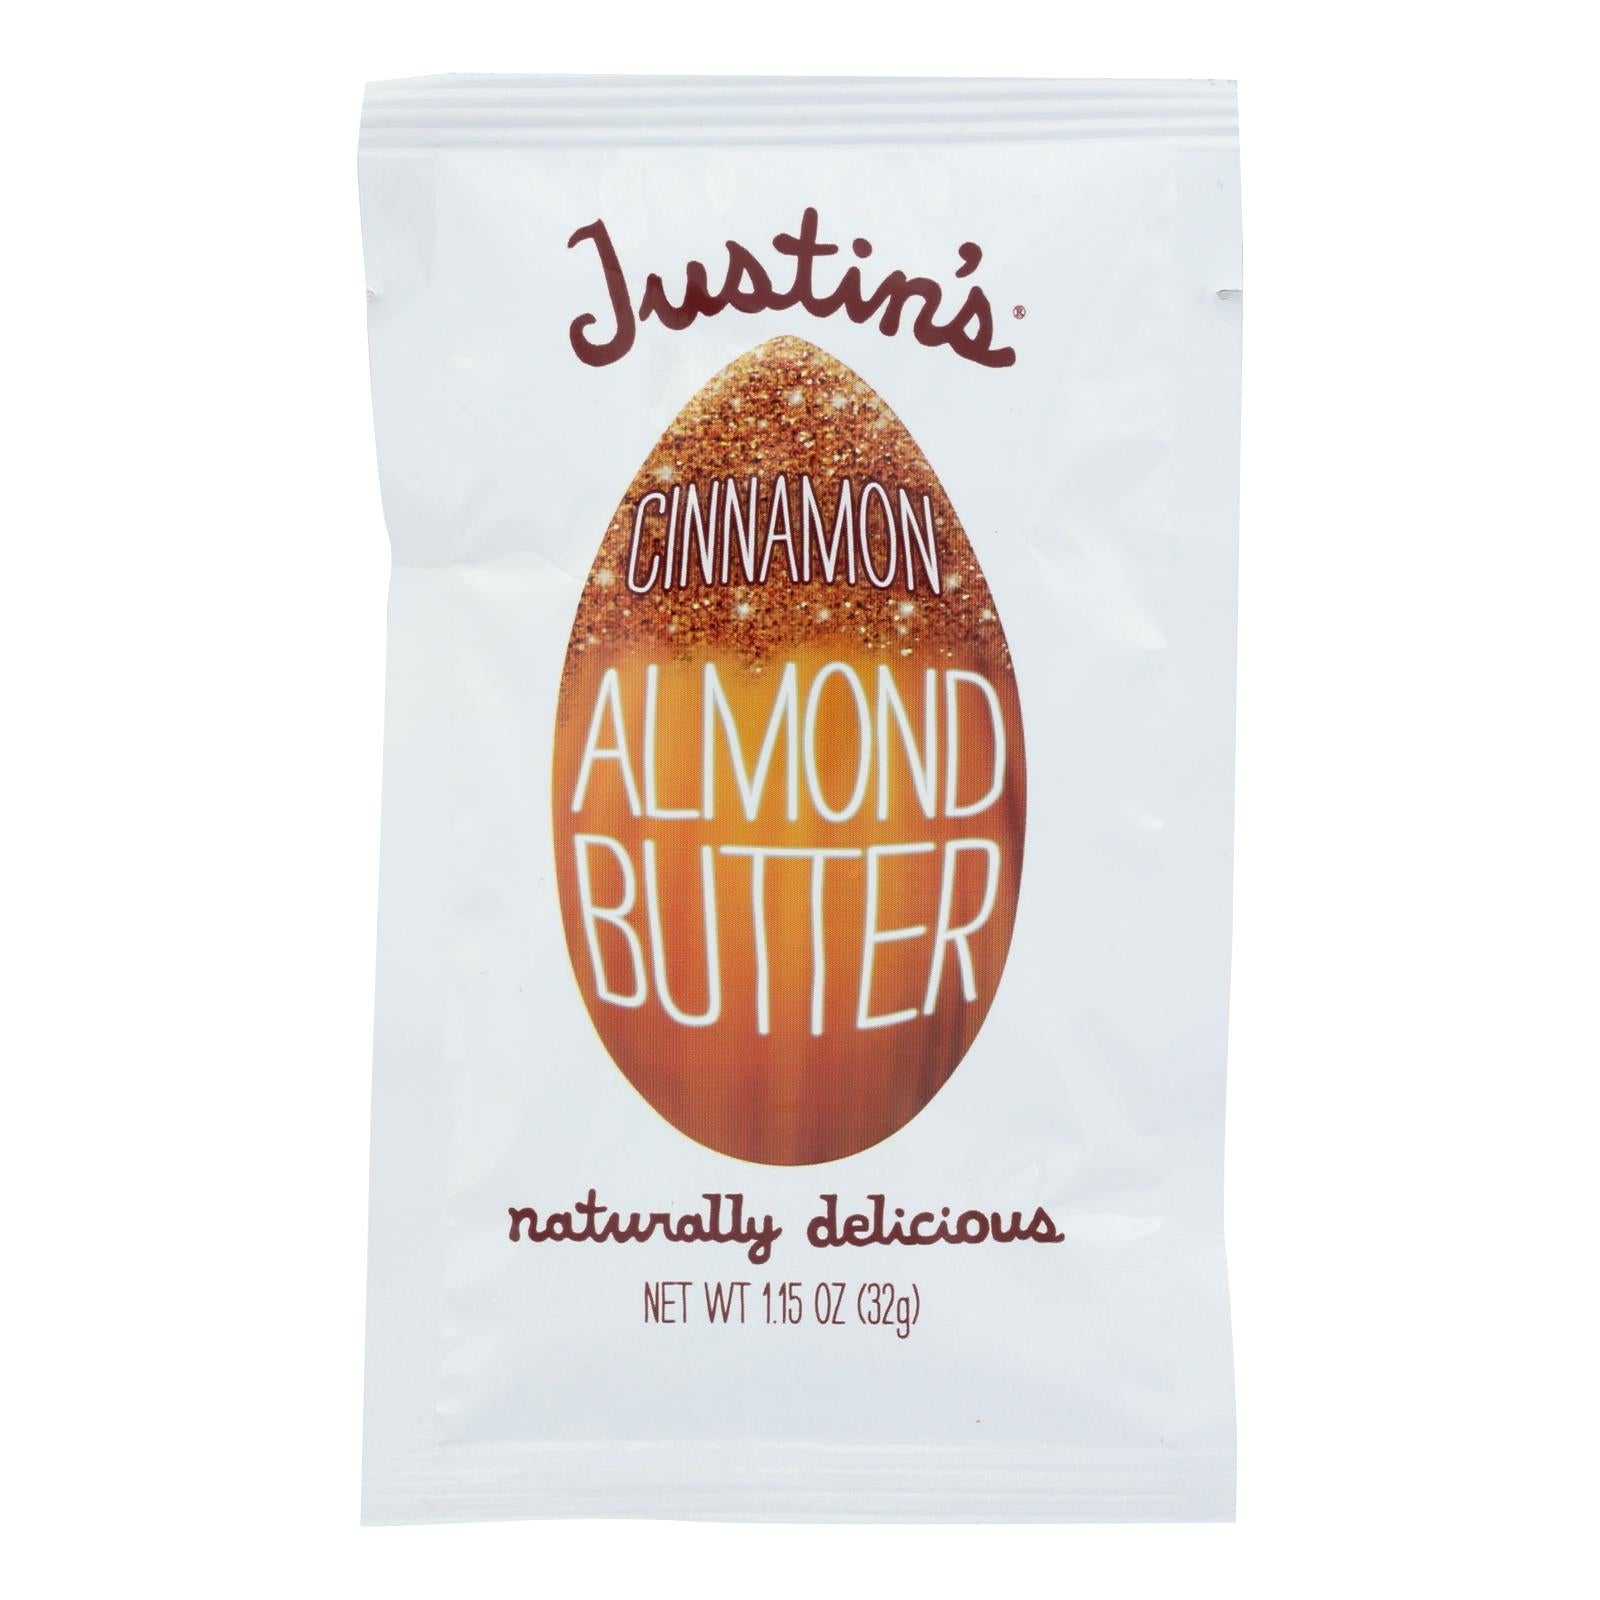 Justin's Nut Butter Squeeze Pack - Almond Butter - Cinnamon - Case Of 10 - 1.15 Oz. - Whole Green Foods